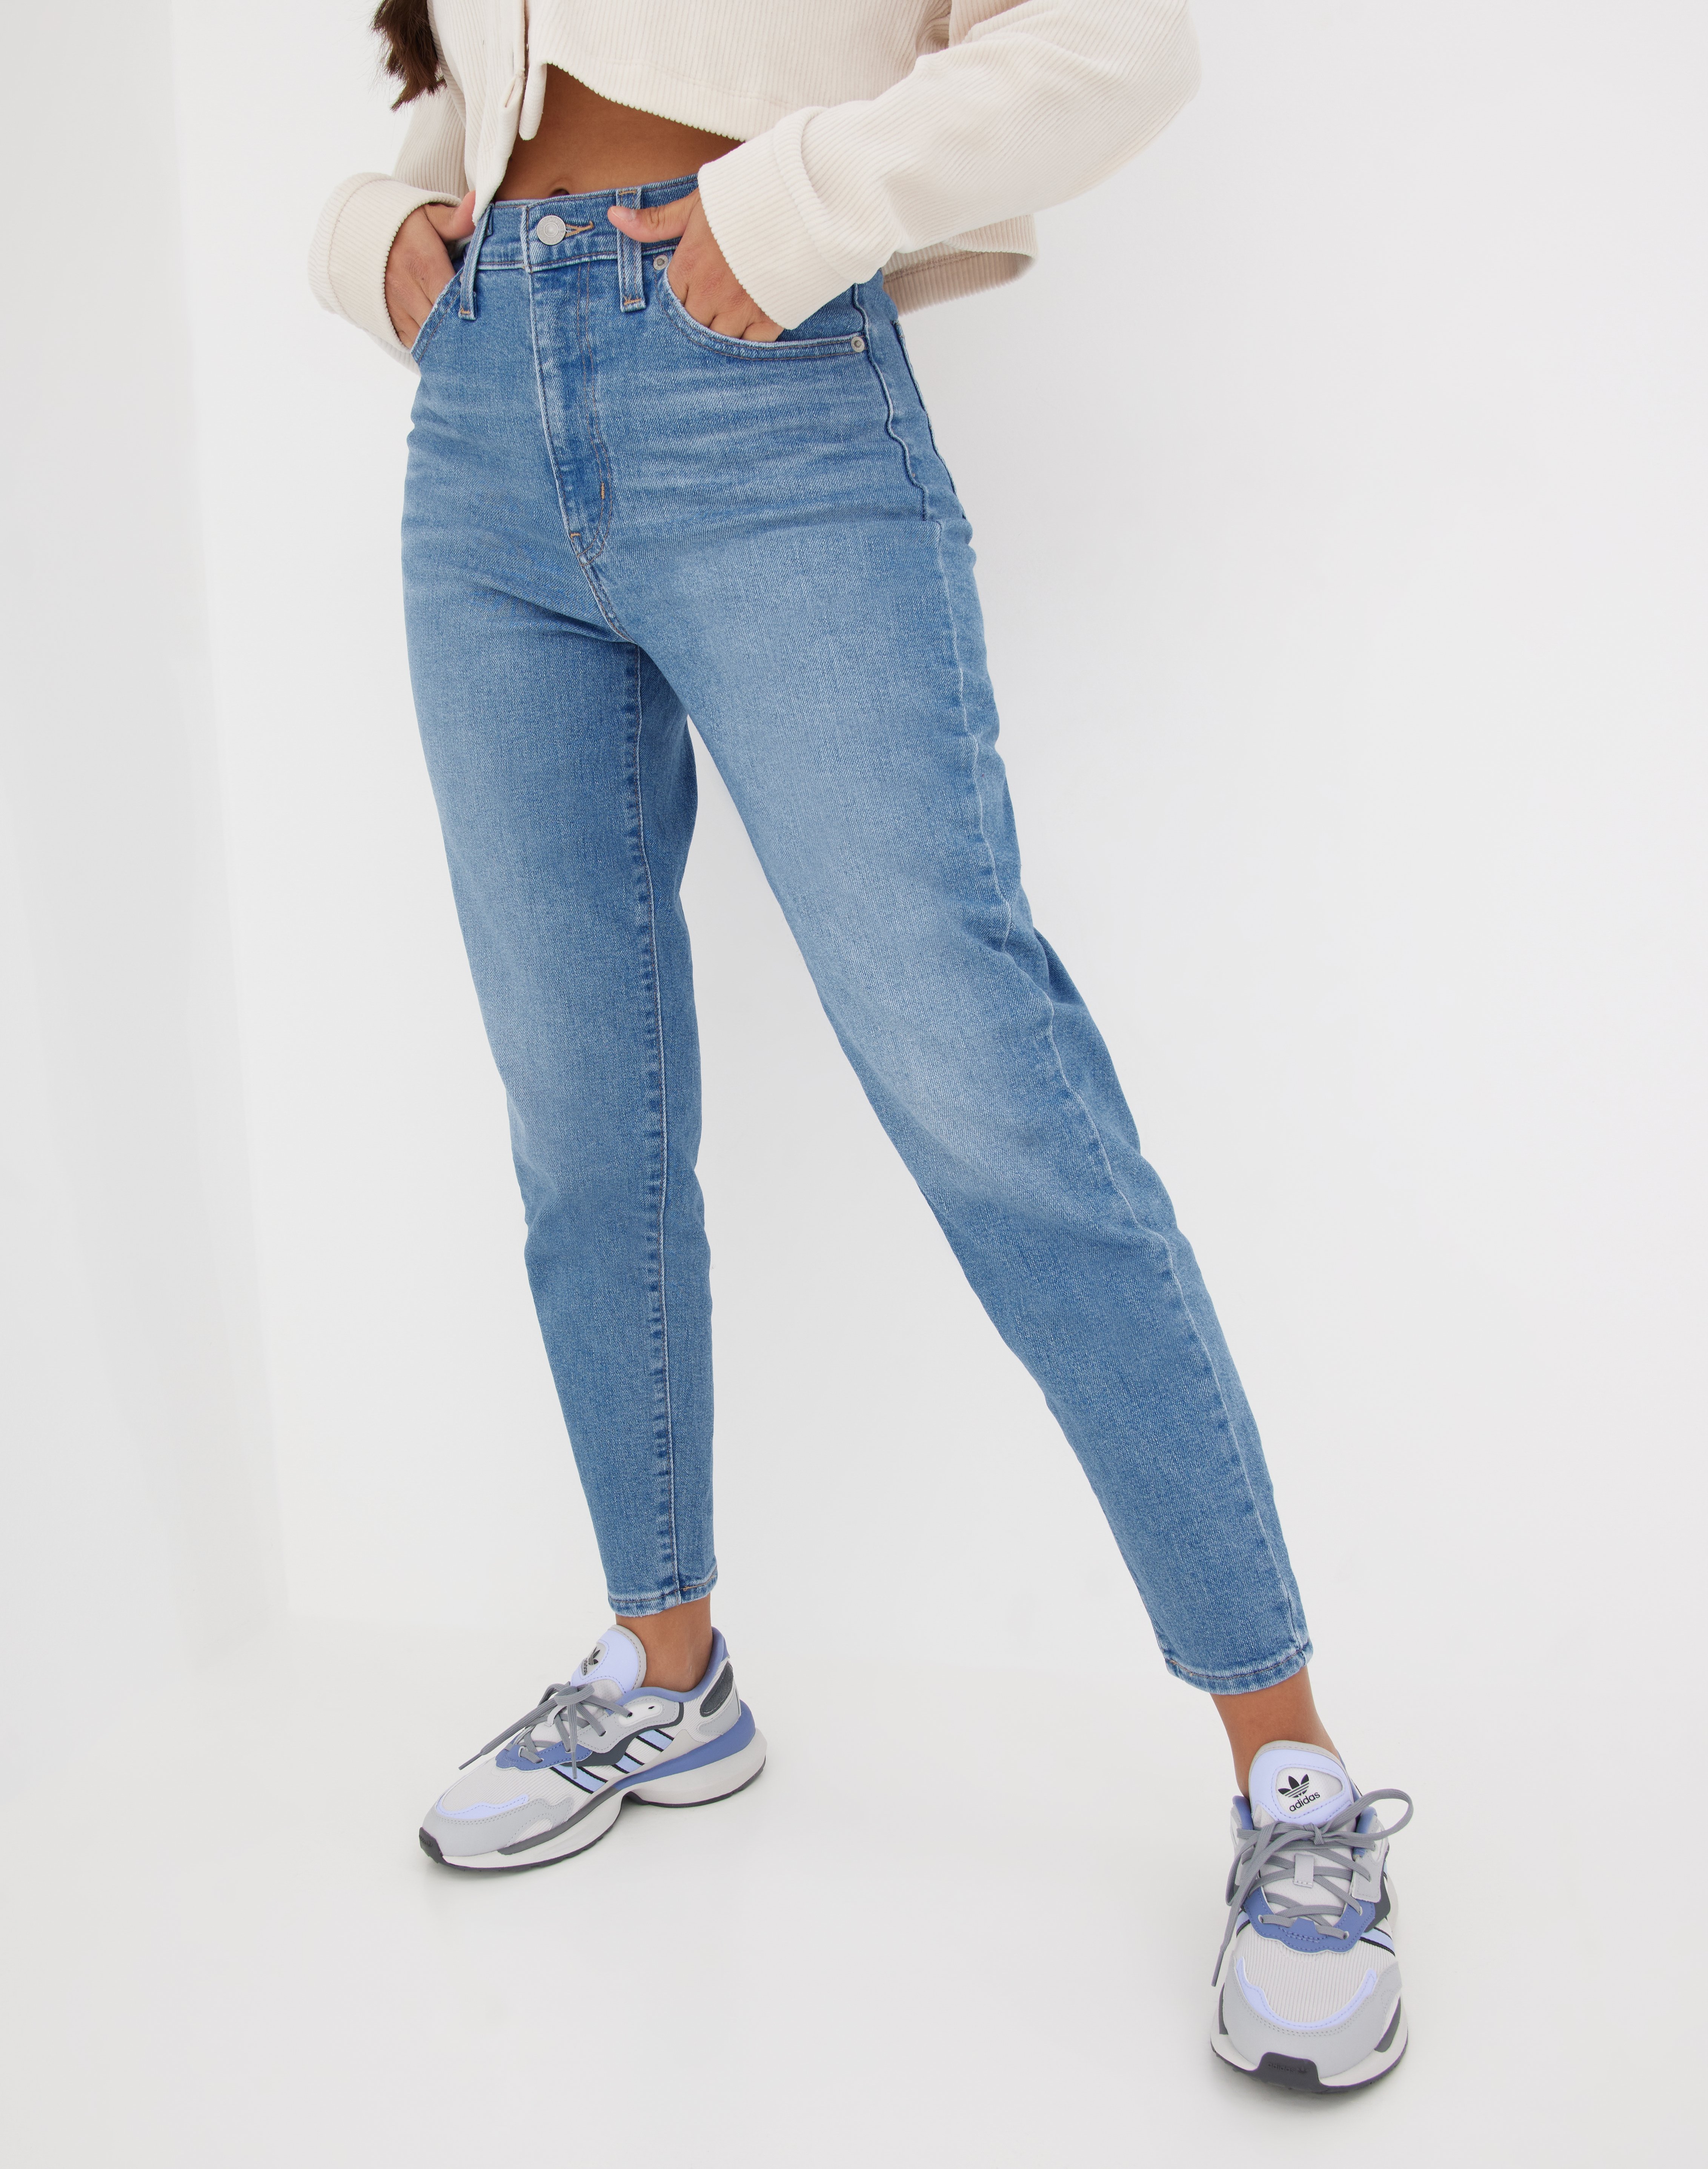 Black High Waisted Mom Jeans Wholesale Cheapest, Save 67% 